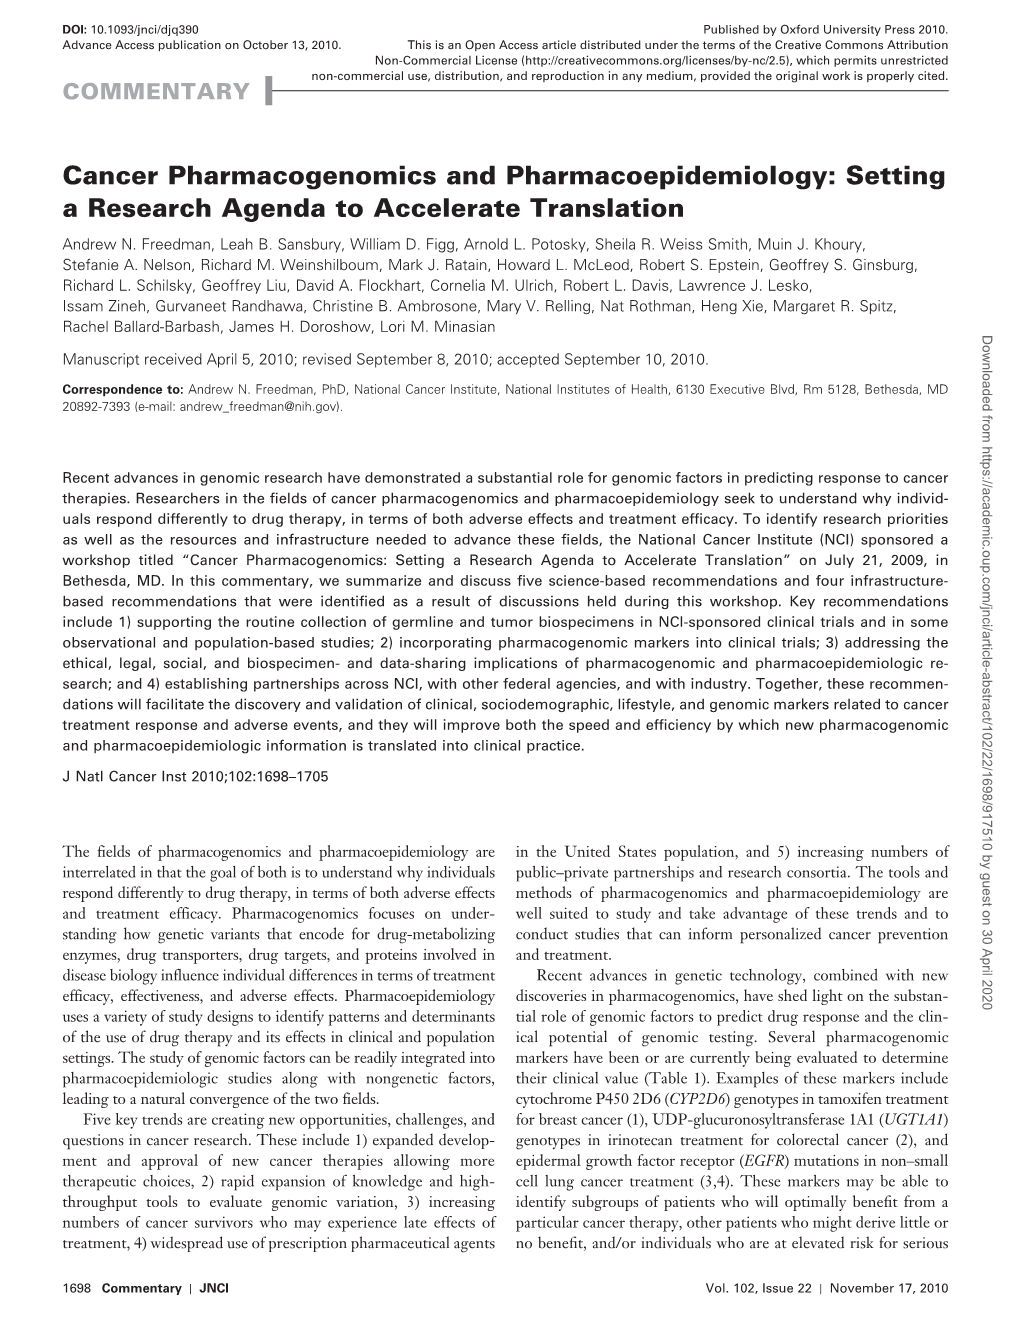 Cancer Pharmacogenomics and Pharmacoepidemiology: Setting a Research Agenda to Accelerate Translation Andrew N